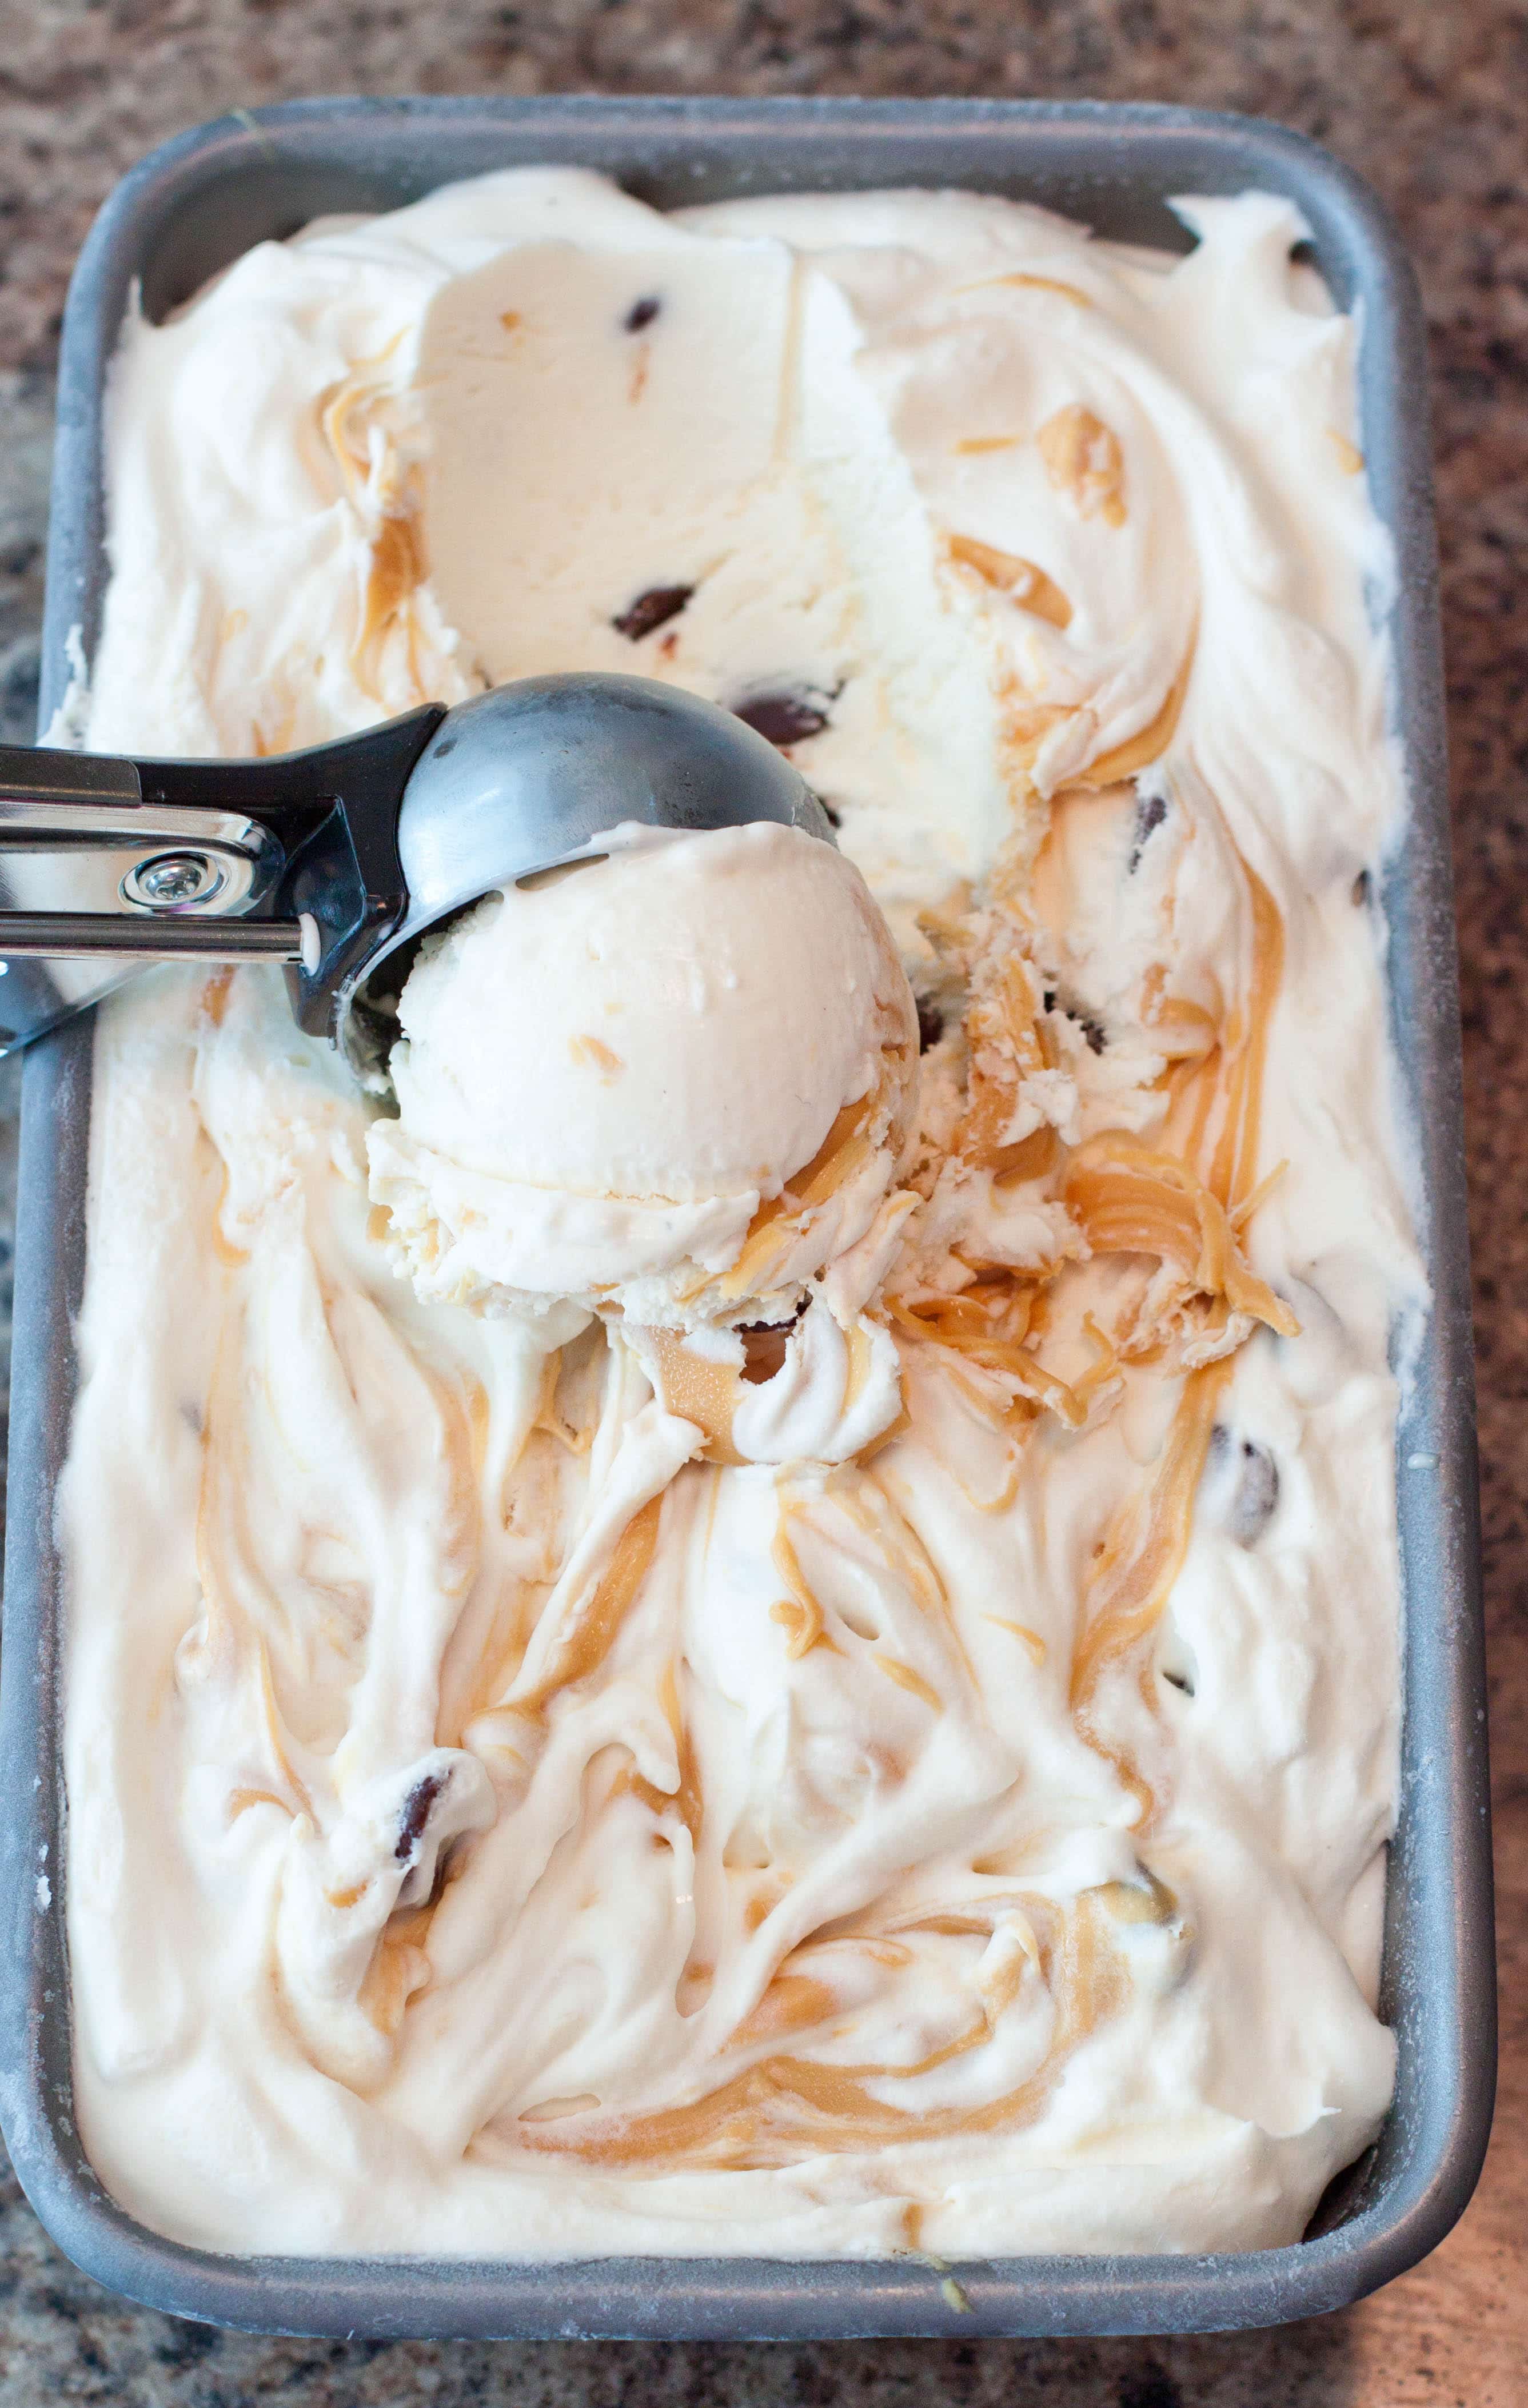  Caramel ice cream being scooped out of container